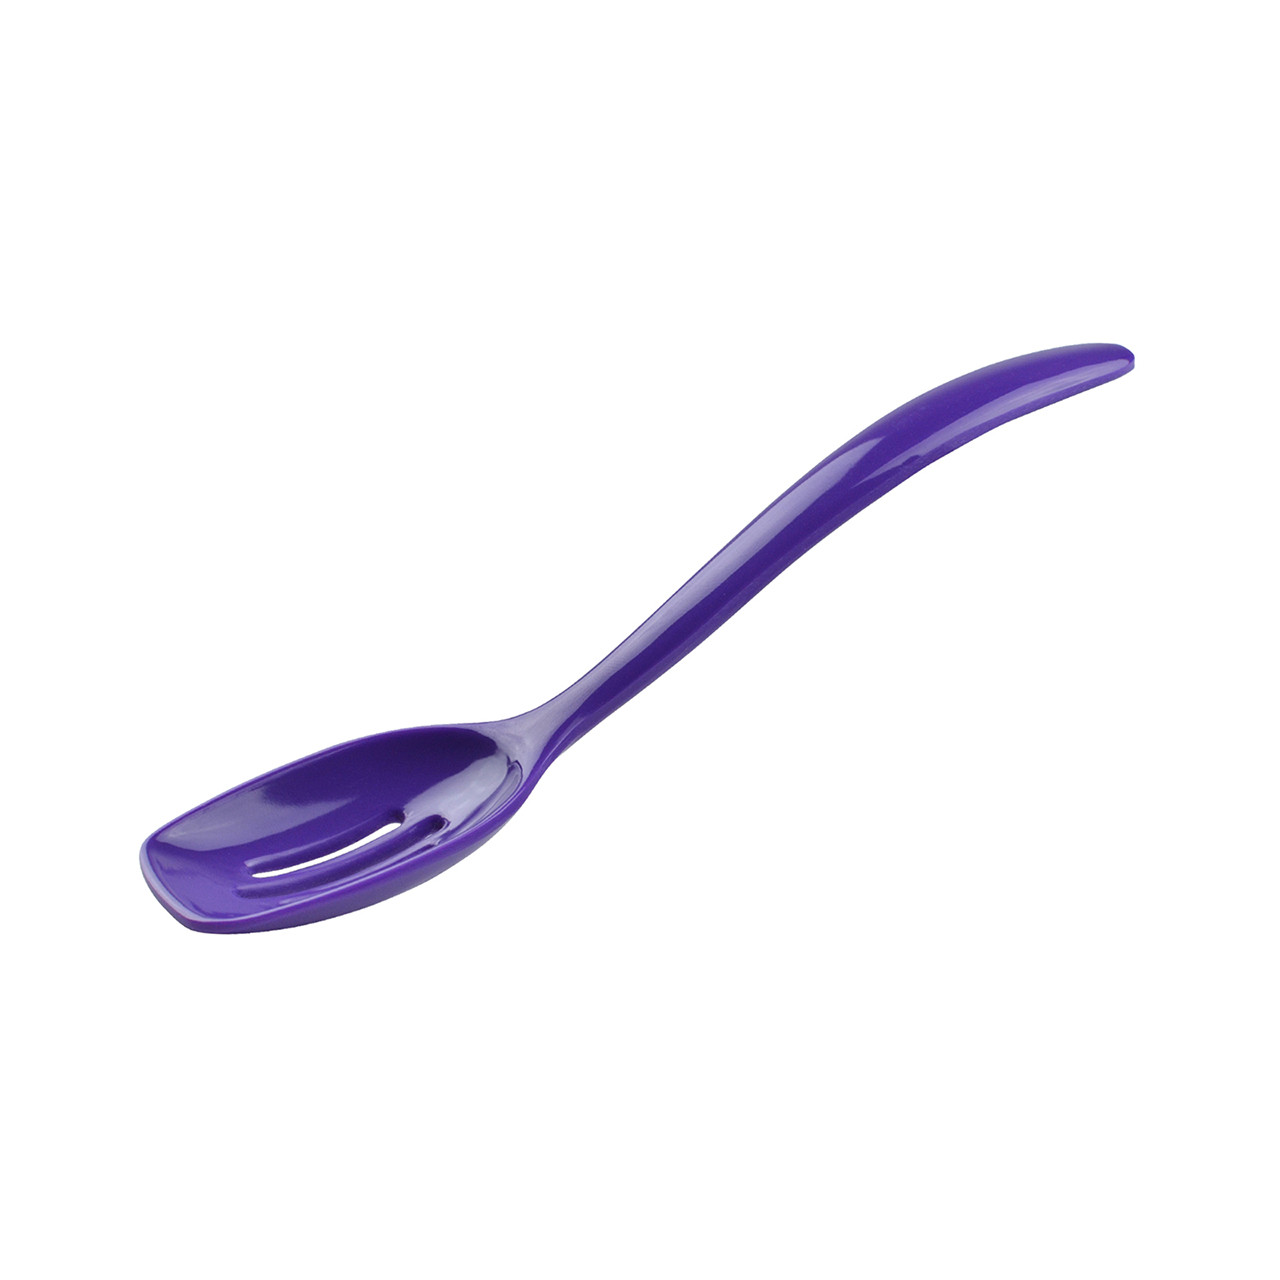 Gourmac 12-Inch Melamine Mixing Spoon (Turquoise)